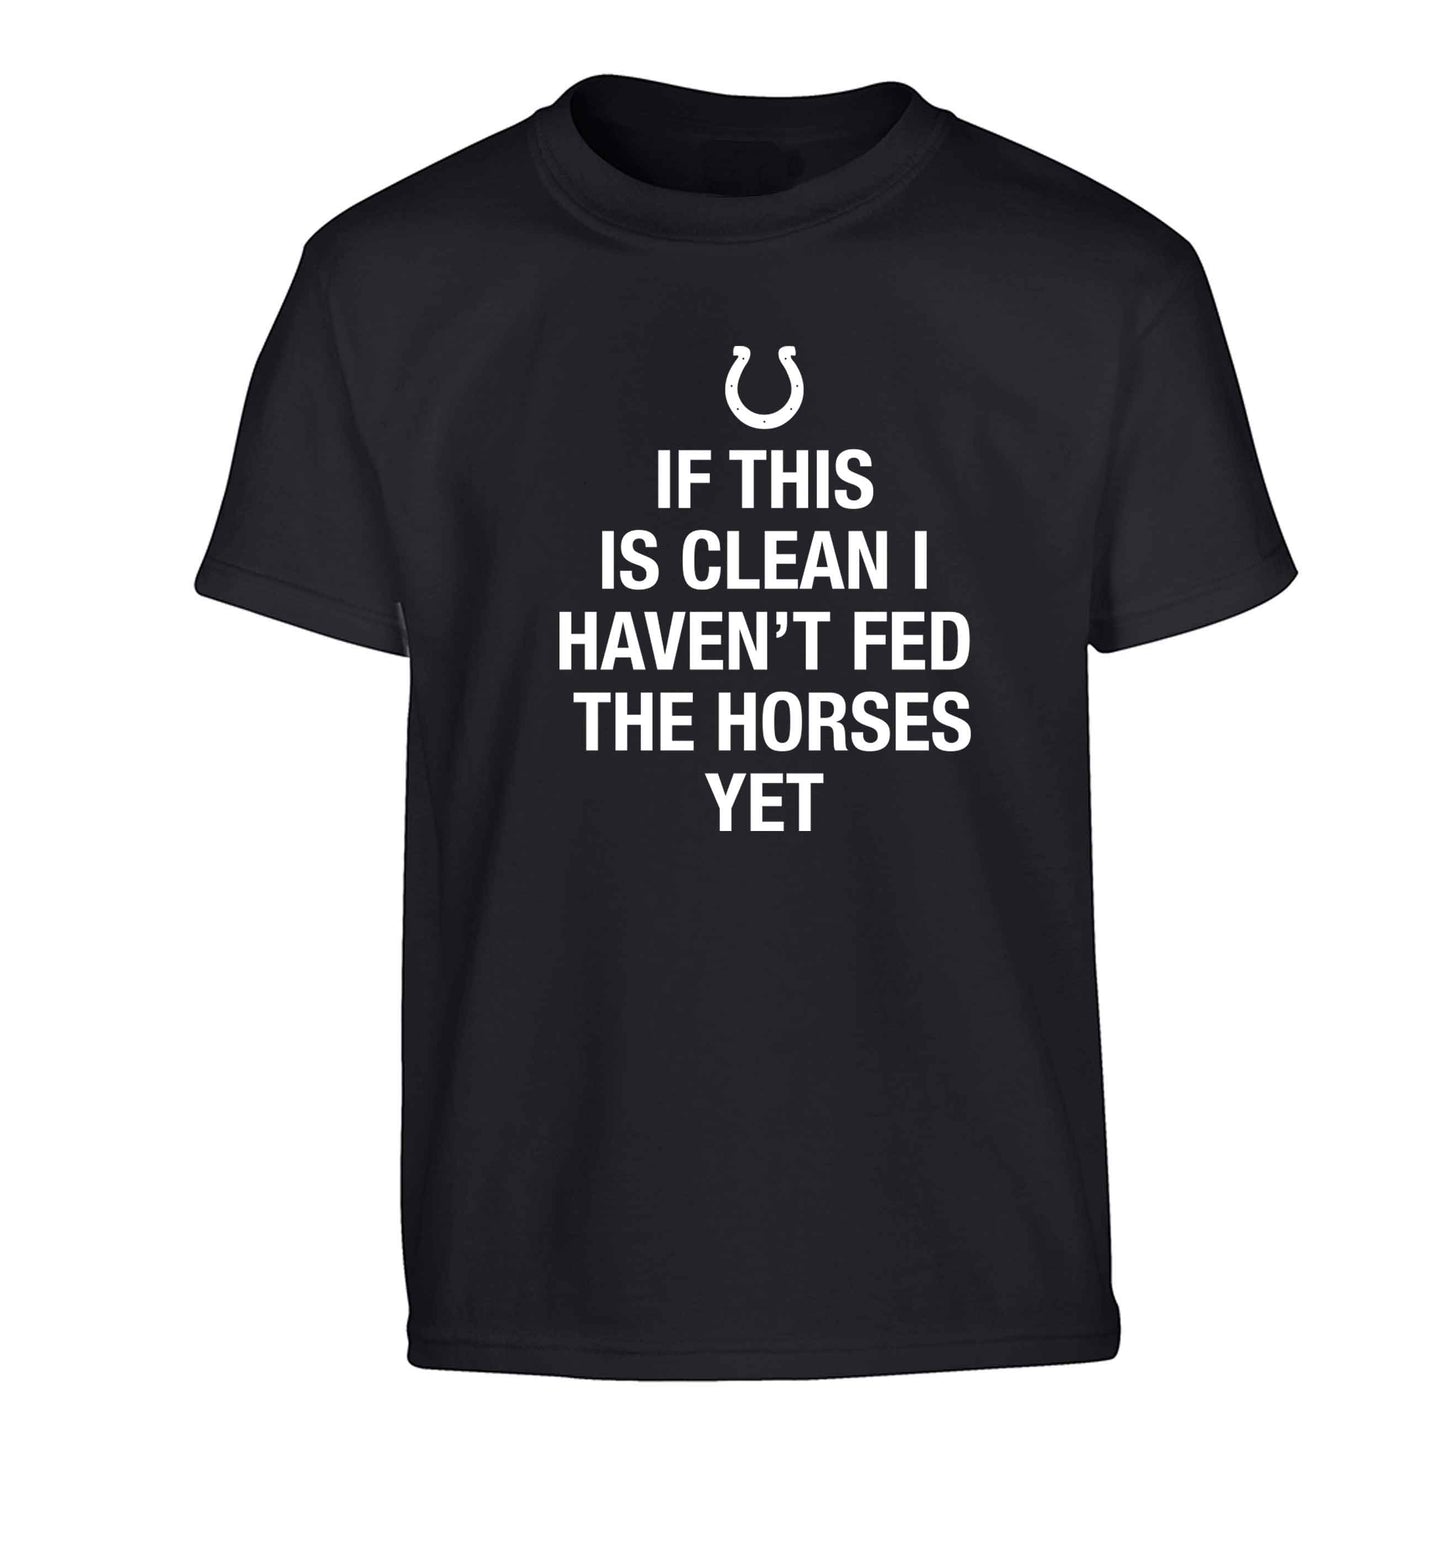 If this isn't clean I haven't fed the horses yet Children's black Tshirt 12-13 Years